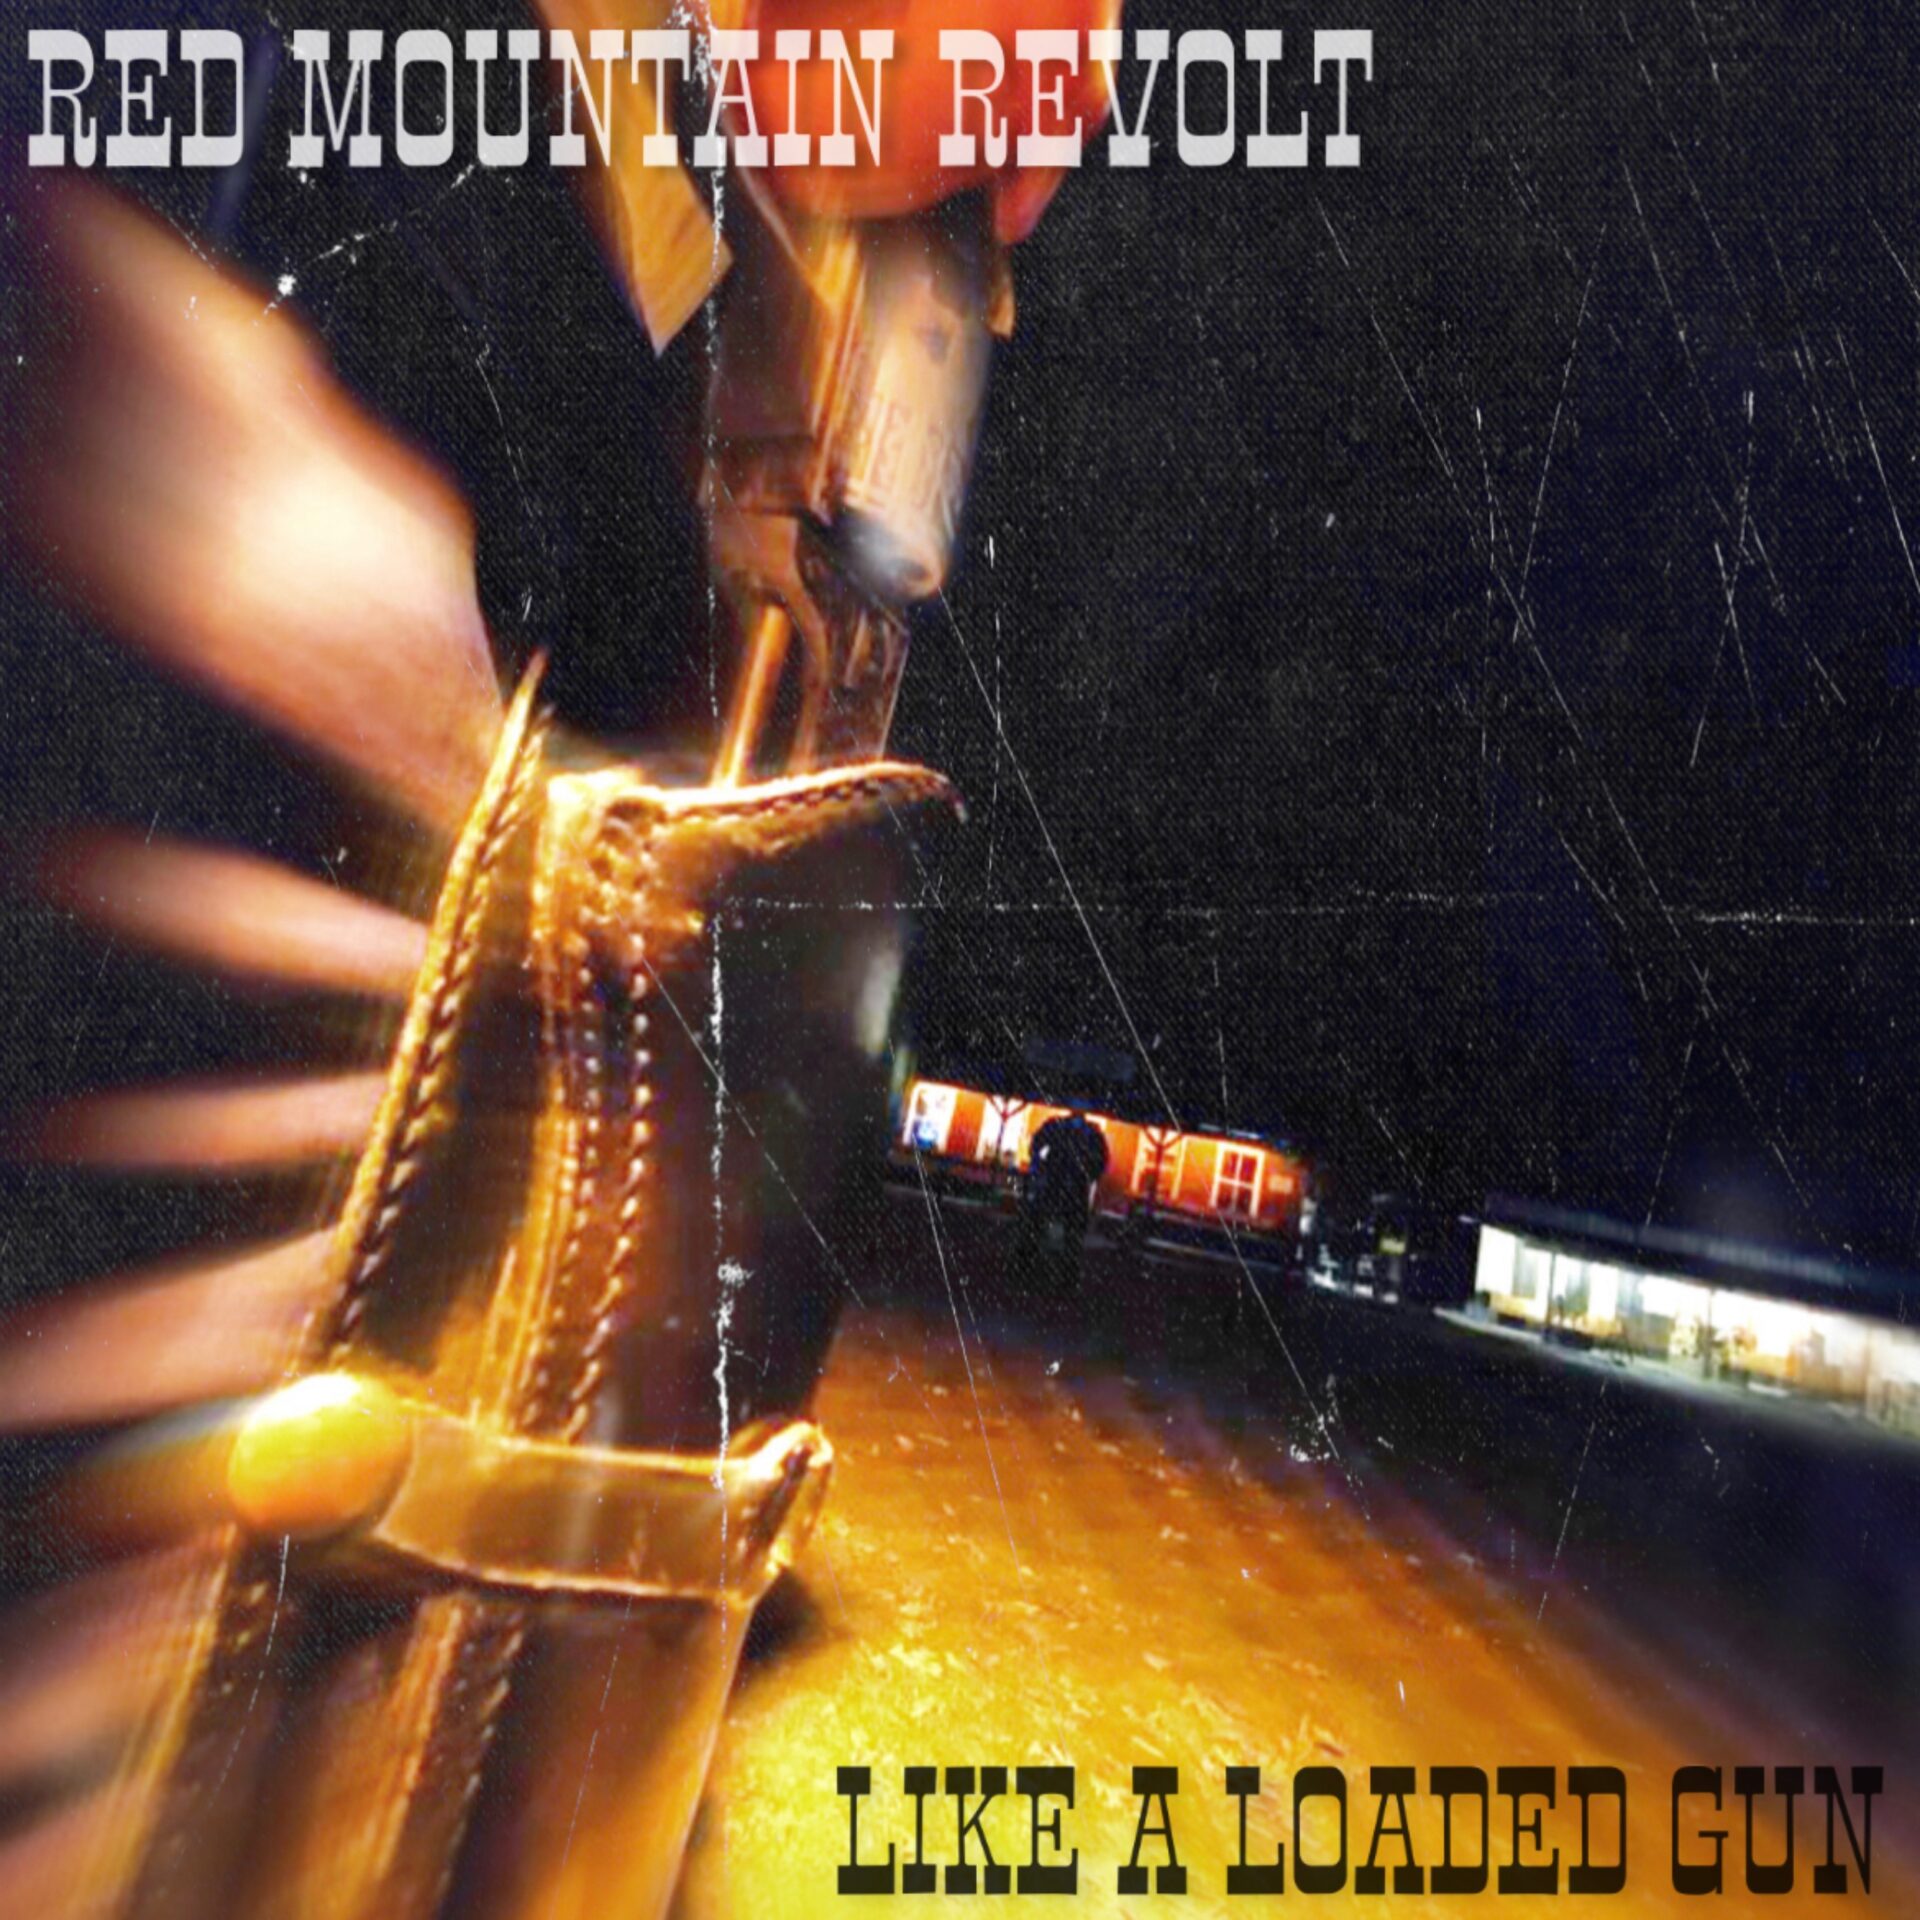 Like a Loaded Gun by Red Mountain Revolt album cover art